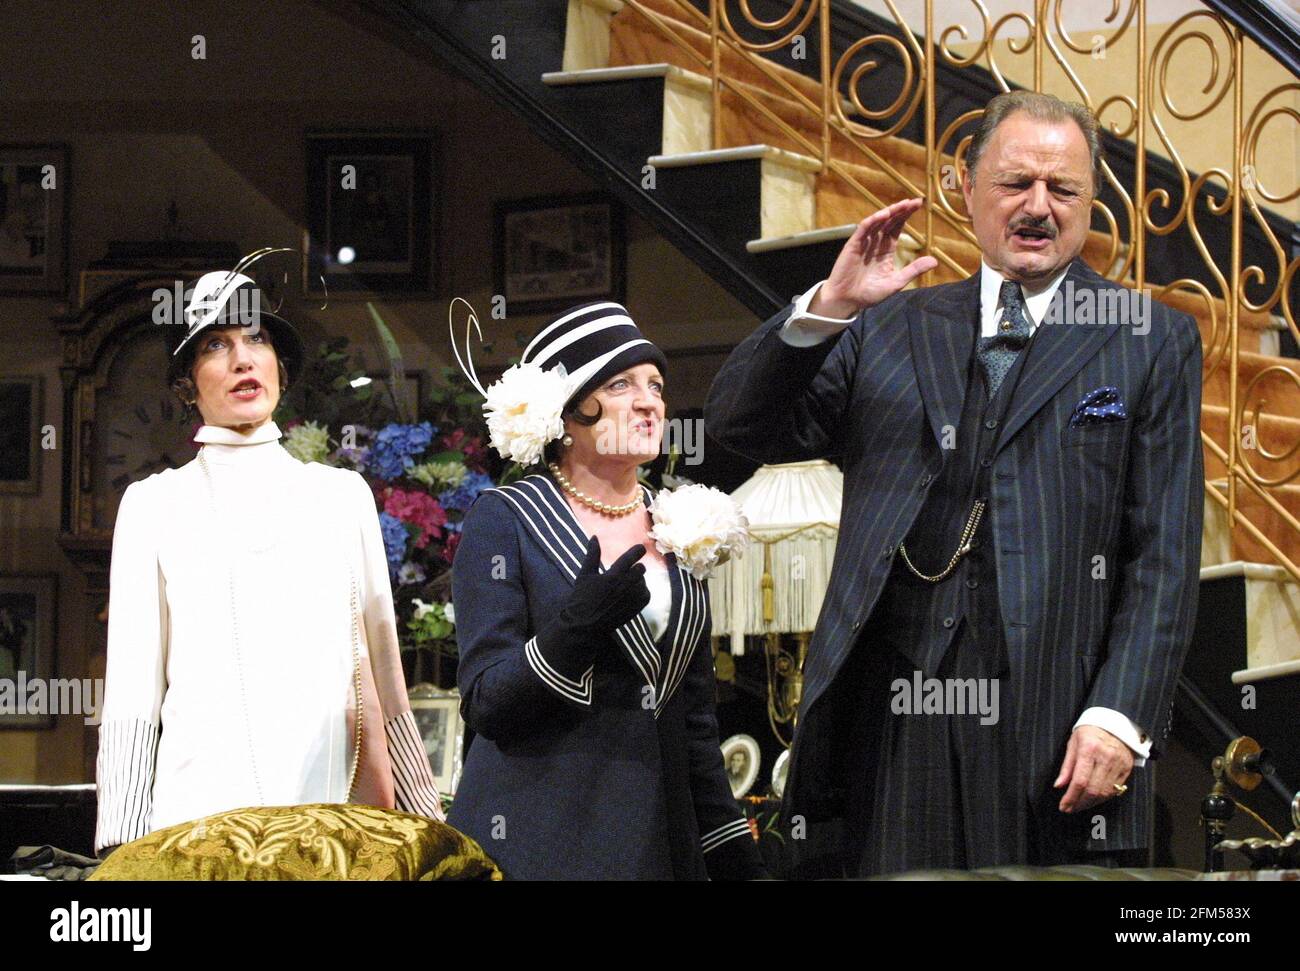 l-r: Harriet Walter (Julie Cavendish), Julia McKenzie (Kitty Dean), Peter Bowles (Herbert Dean) in THE ROYAL FAMILY by George S. Kaufman & Edna Ferber at the Theatre Royal Haymarket, London SW1  01/11/2001 design: Anthony Ward  lighting: Jon Buswell  director: Peter Hall Stock Photo